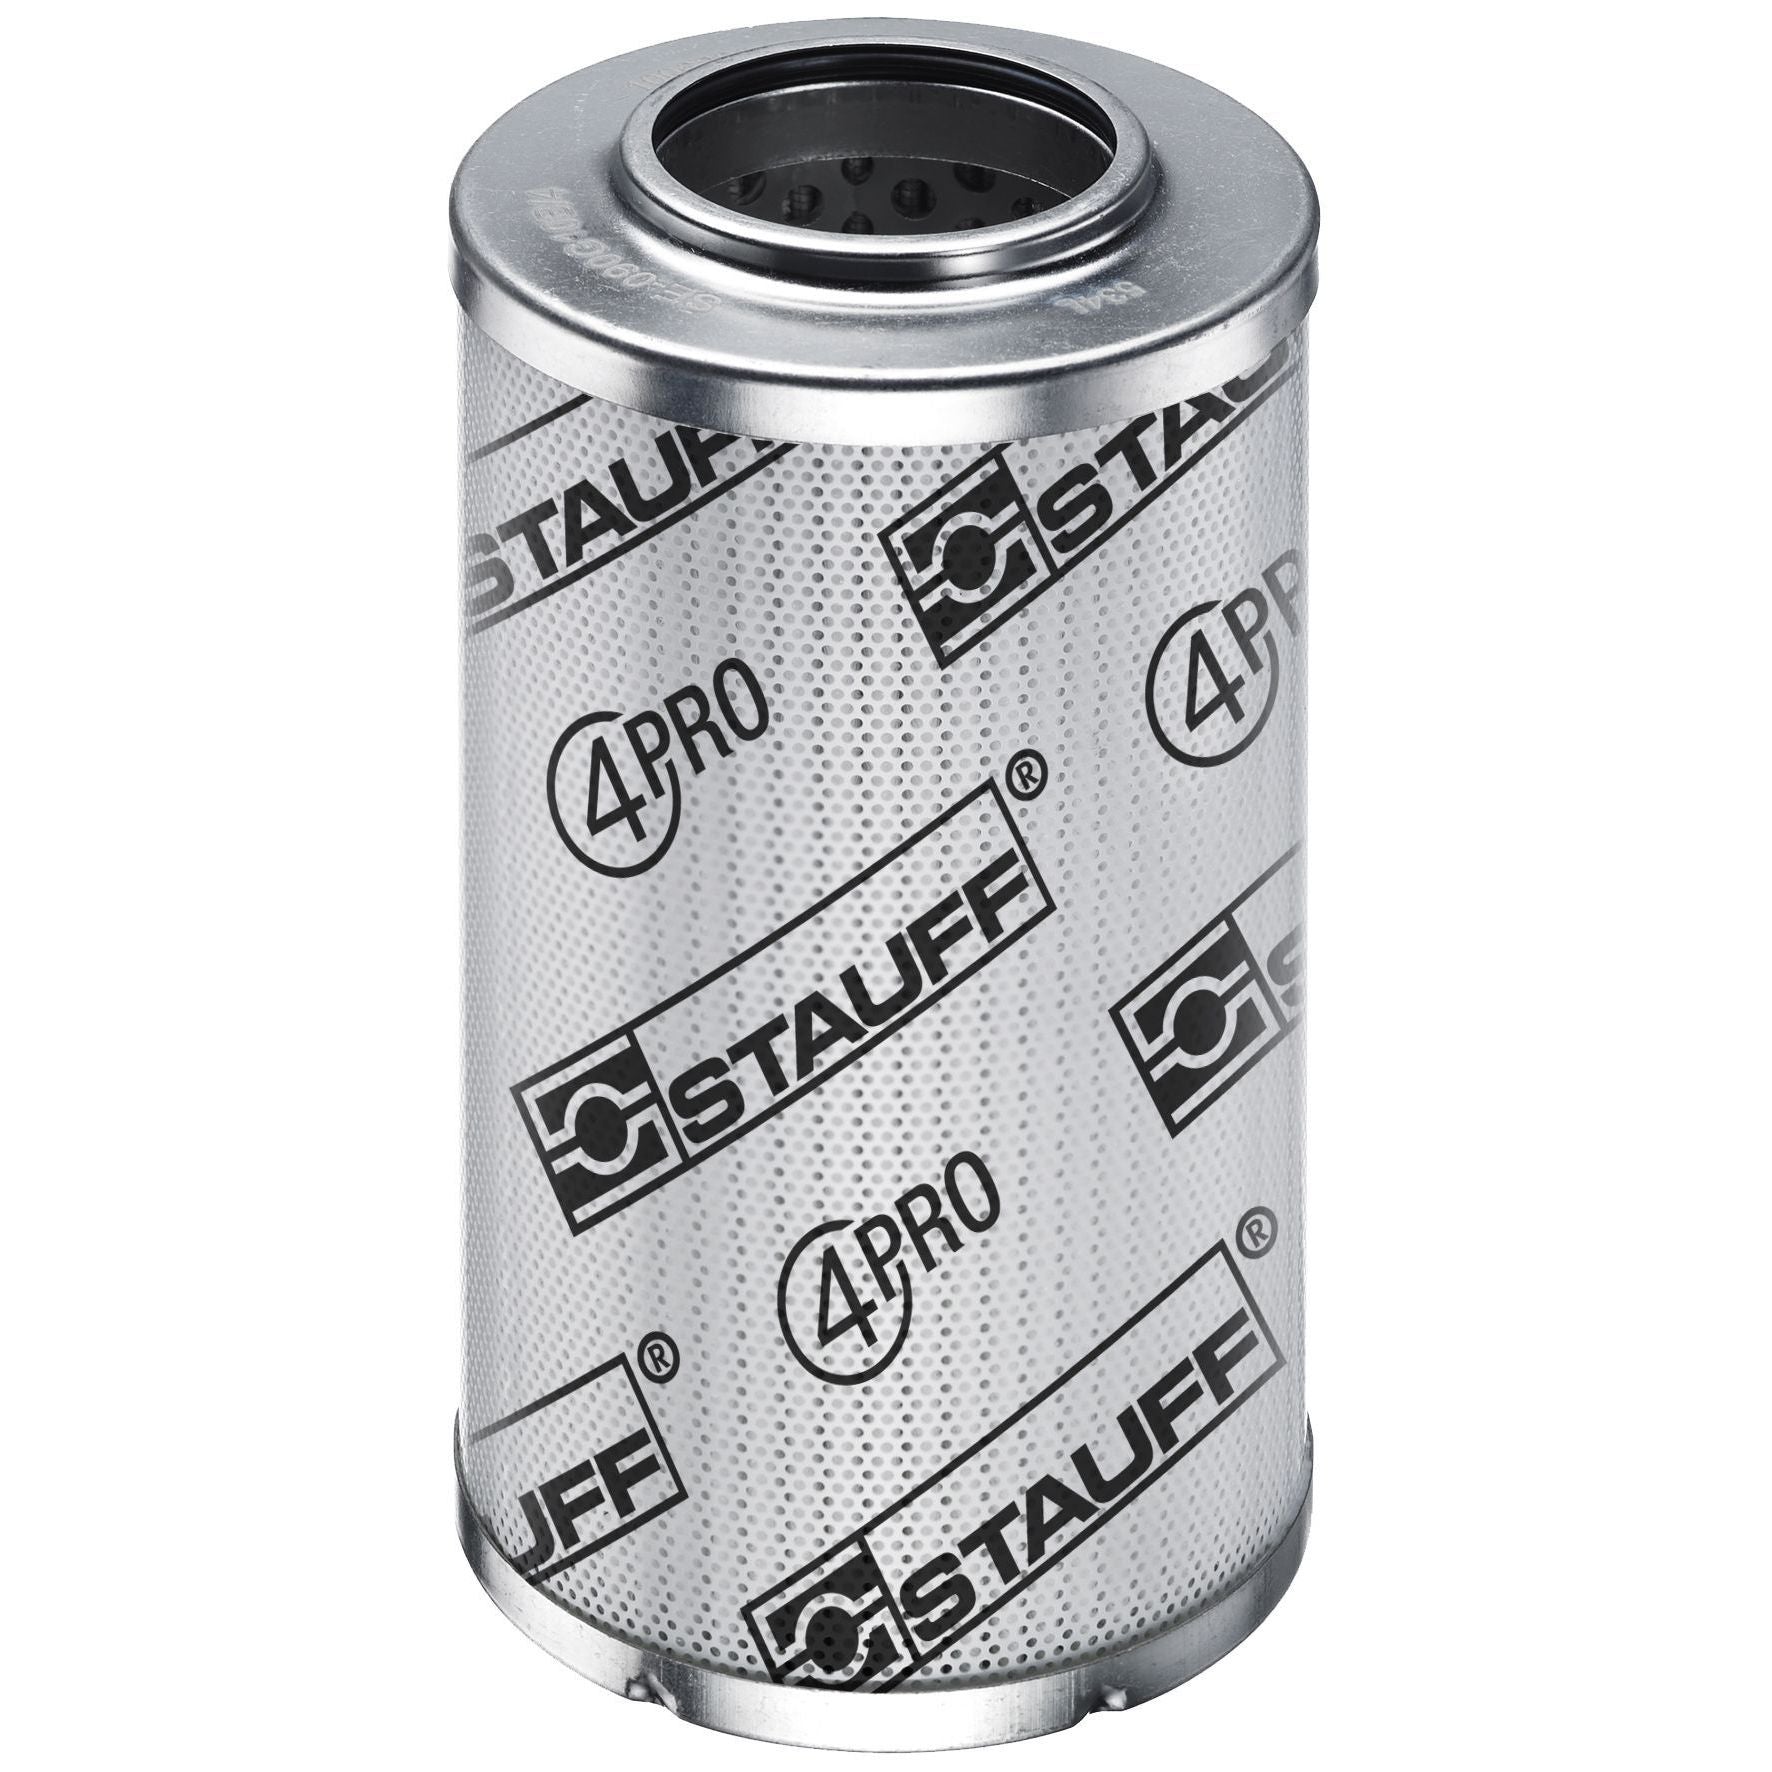 SE-045-H-05-V/4 : Stauff SF-045 Series Filter Element, 5 Micron, Synthetic, 3045psi Collapse Differential, Viton Seals